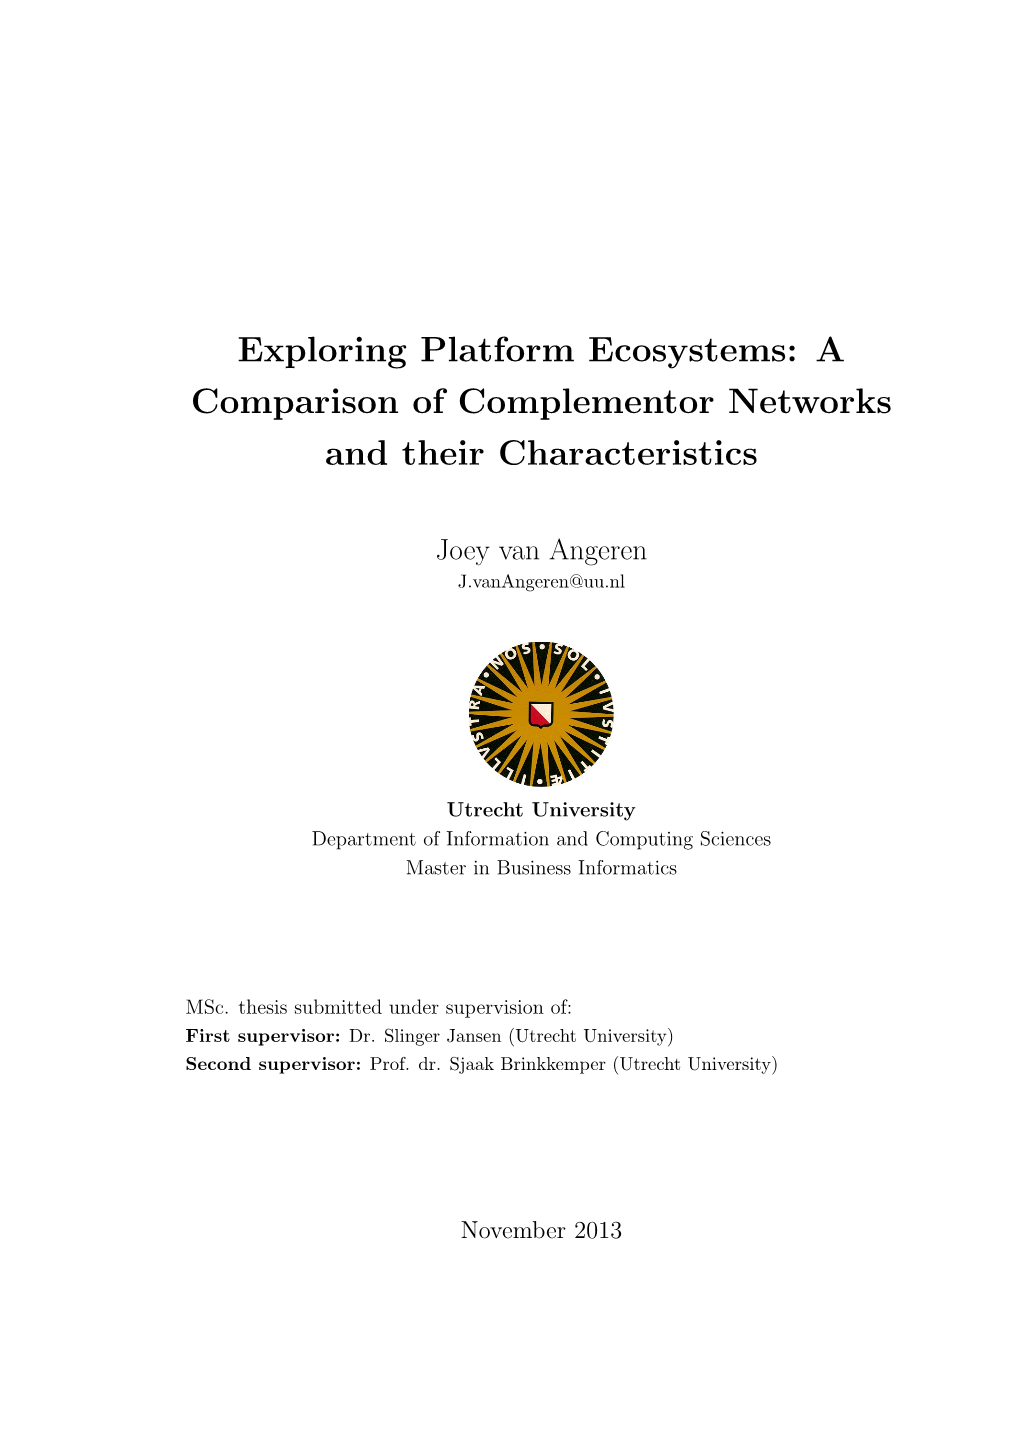 Exploring Platform Ecosystems: a Comparison of Complementor Networks and Their Characteristics